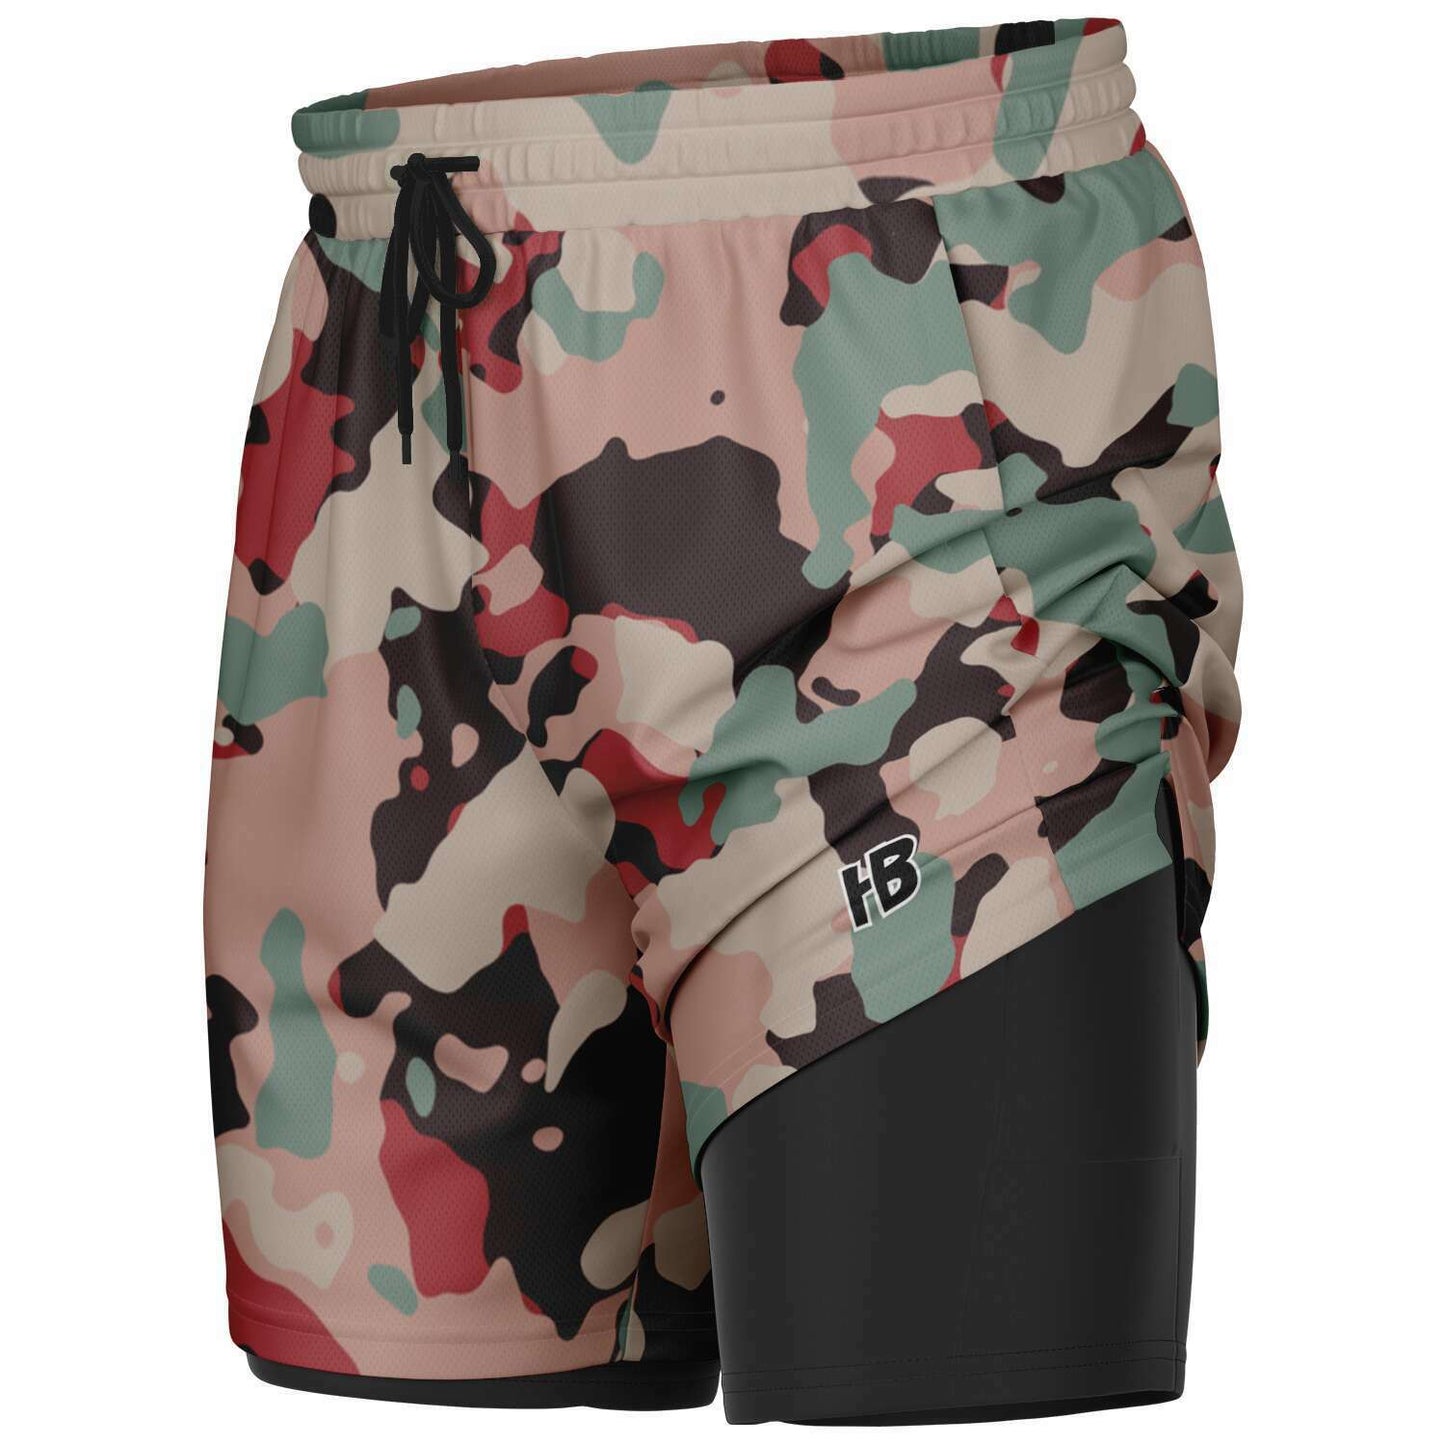 OuT tHeRe MeNs aNd WomEns 2 In 1 ShOrTs